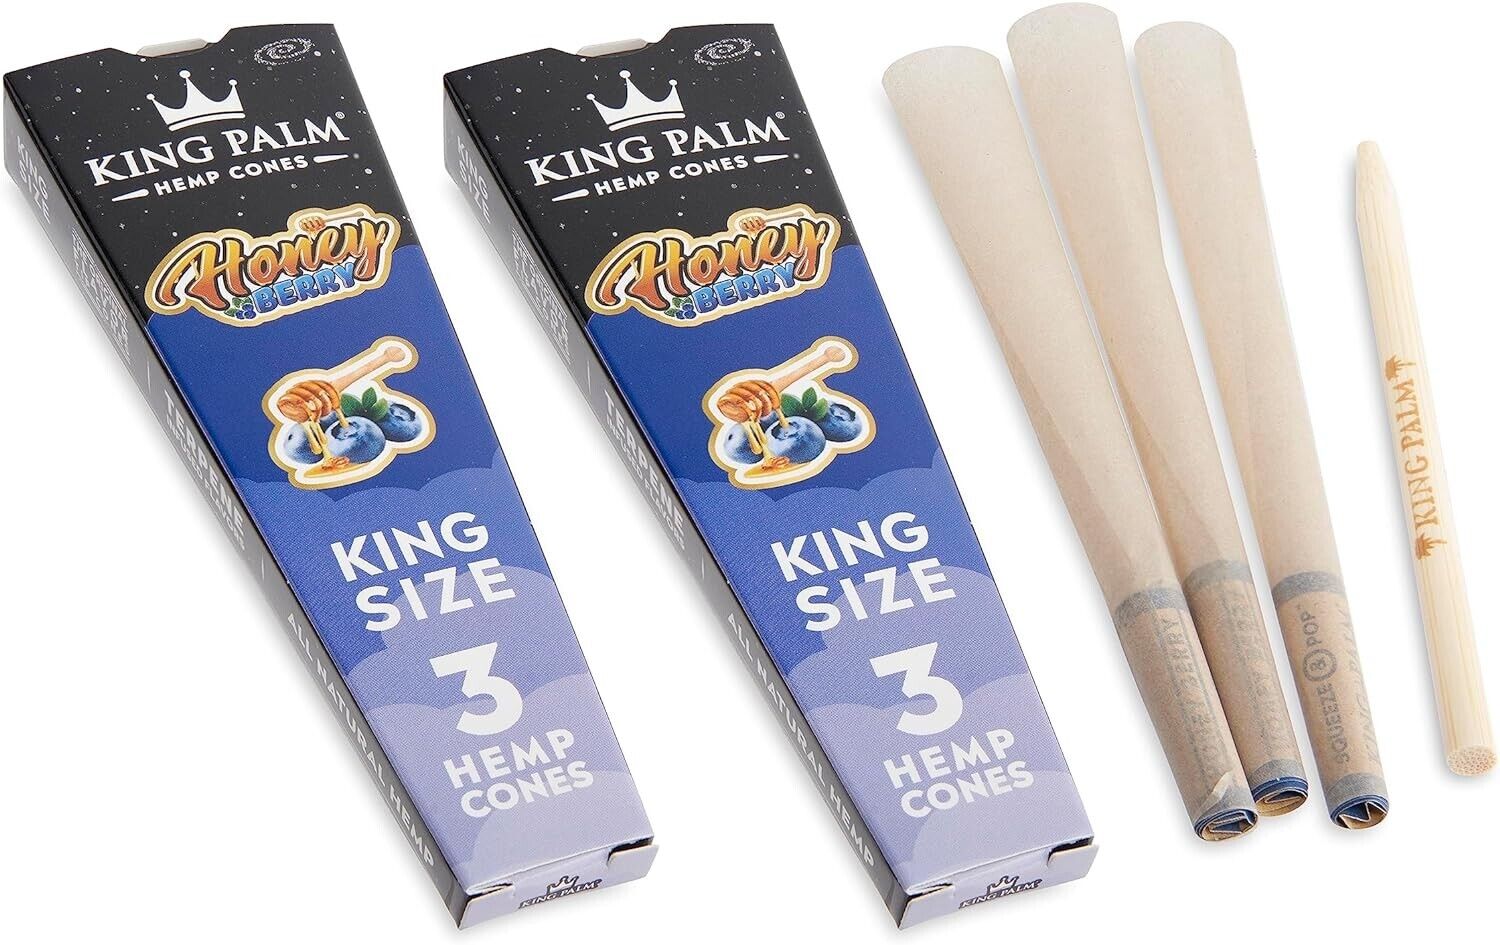 King Palm | King Size | Honey Berry | 3 Packs of 3 Each = 9 Rolls